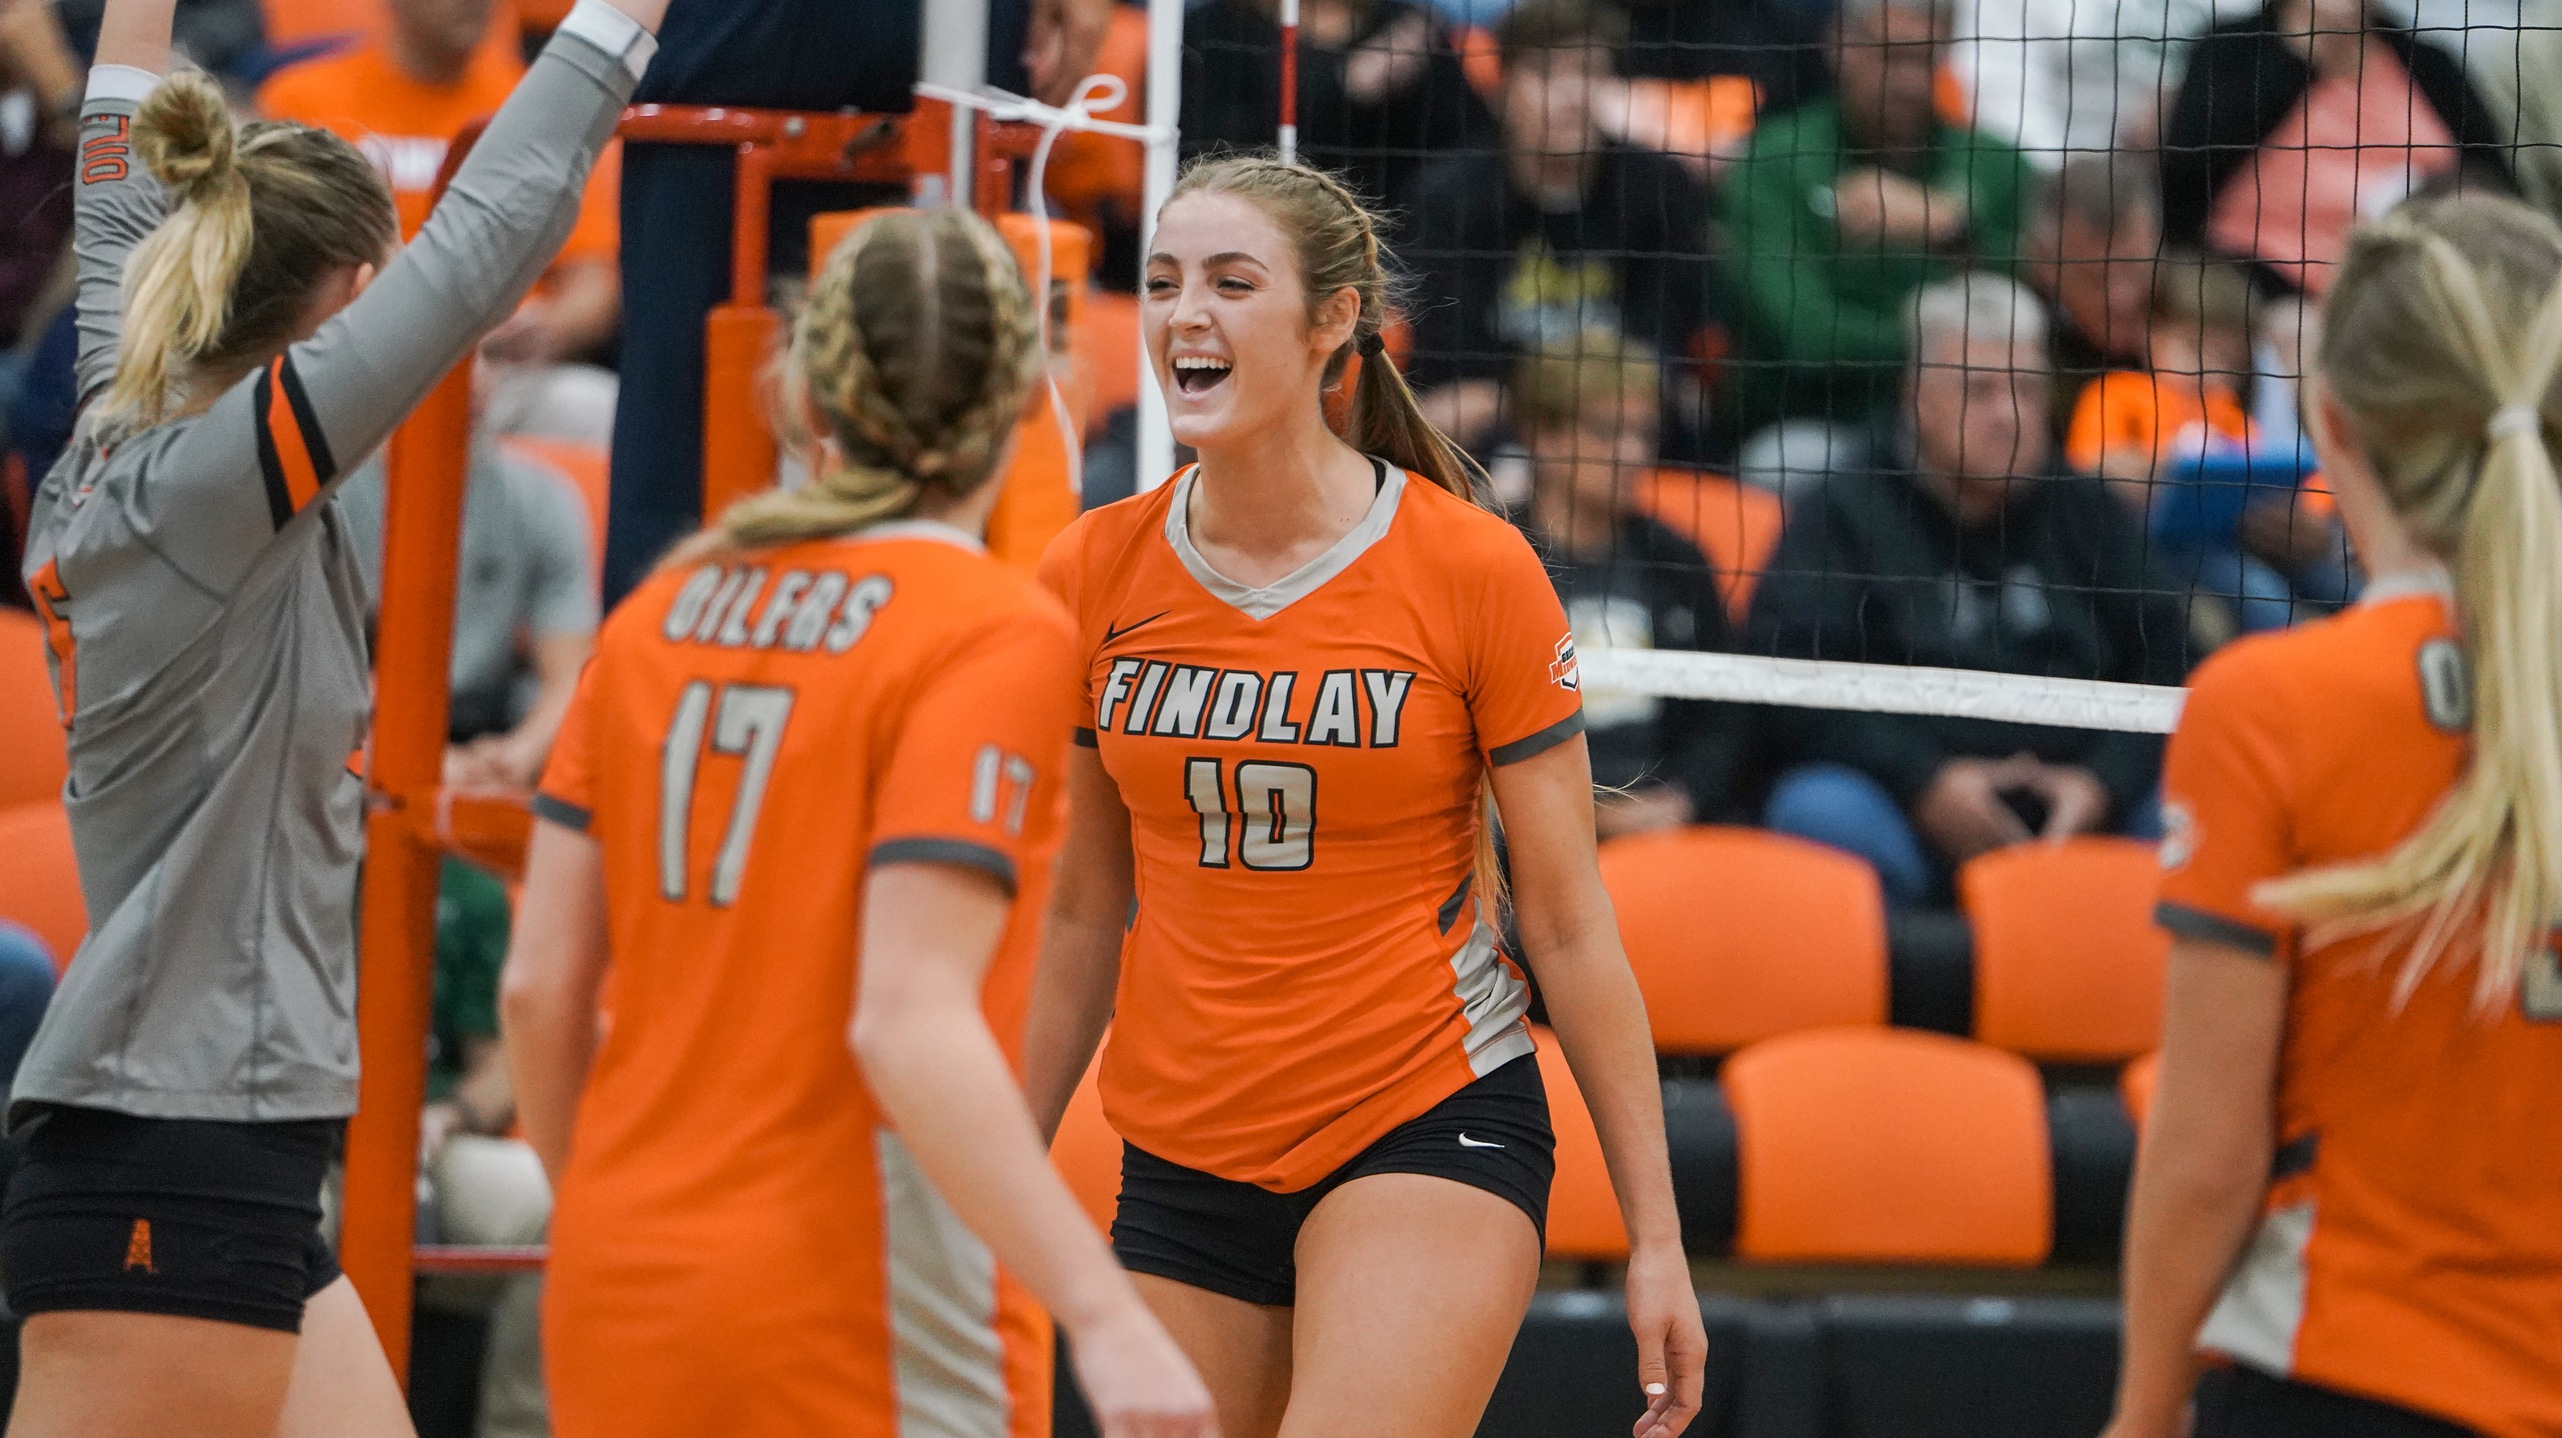 The Oilers Journey to Victory | Findlay Dominates Tiffin